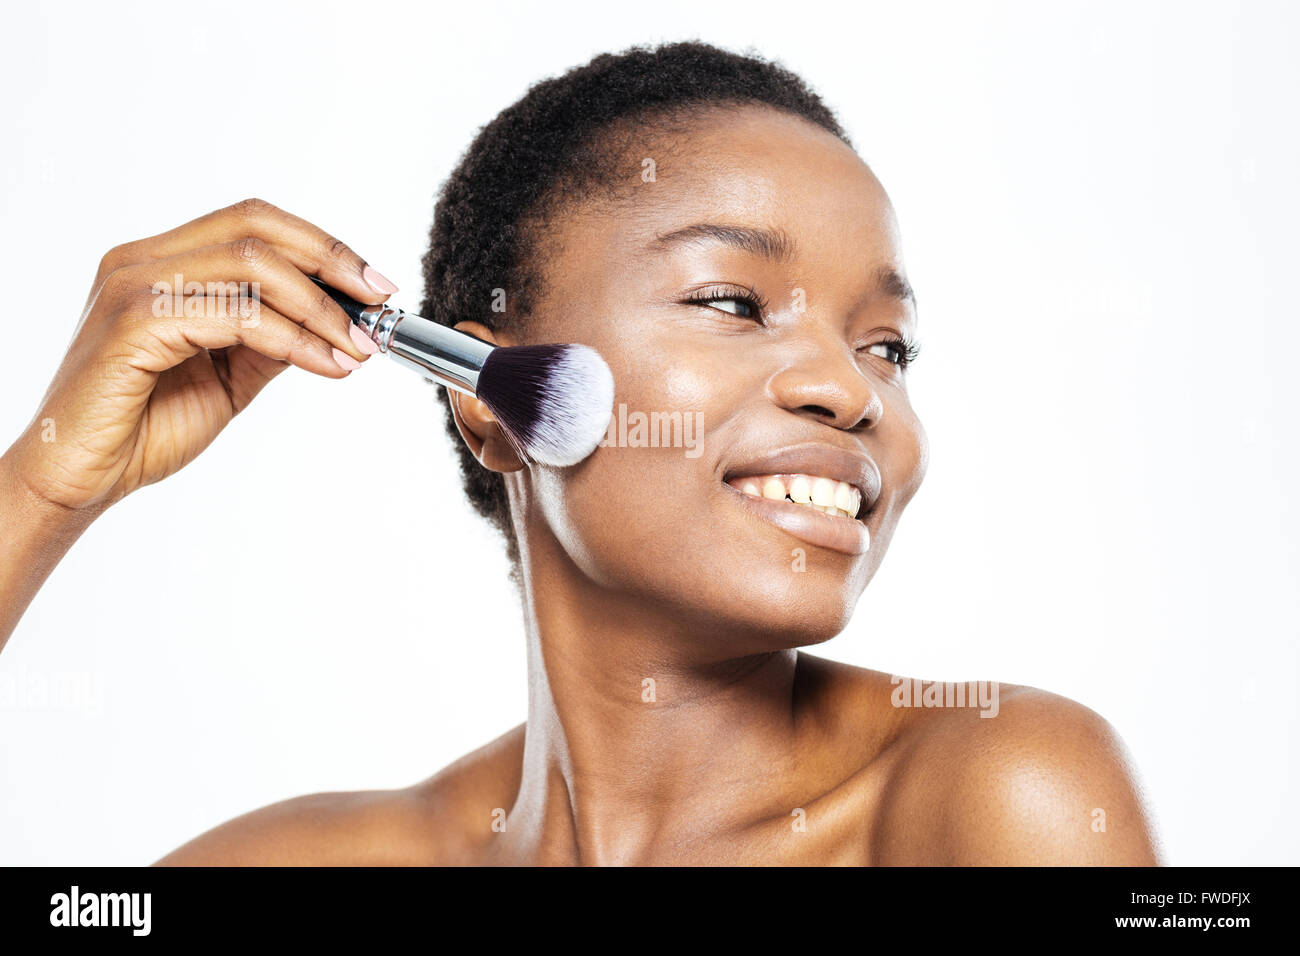 Smiling afro american woman applying makeup with brush isolated on a white background Stock Photo